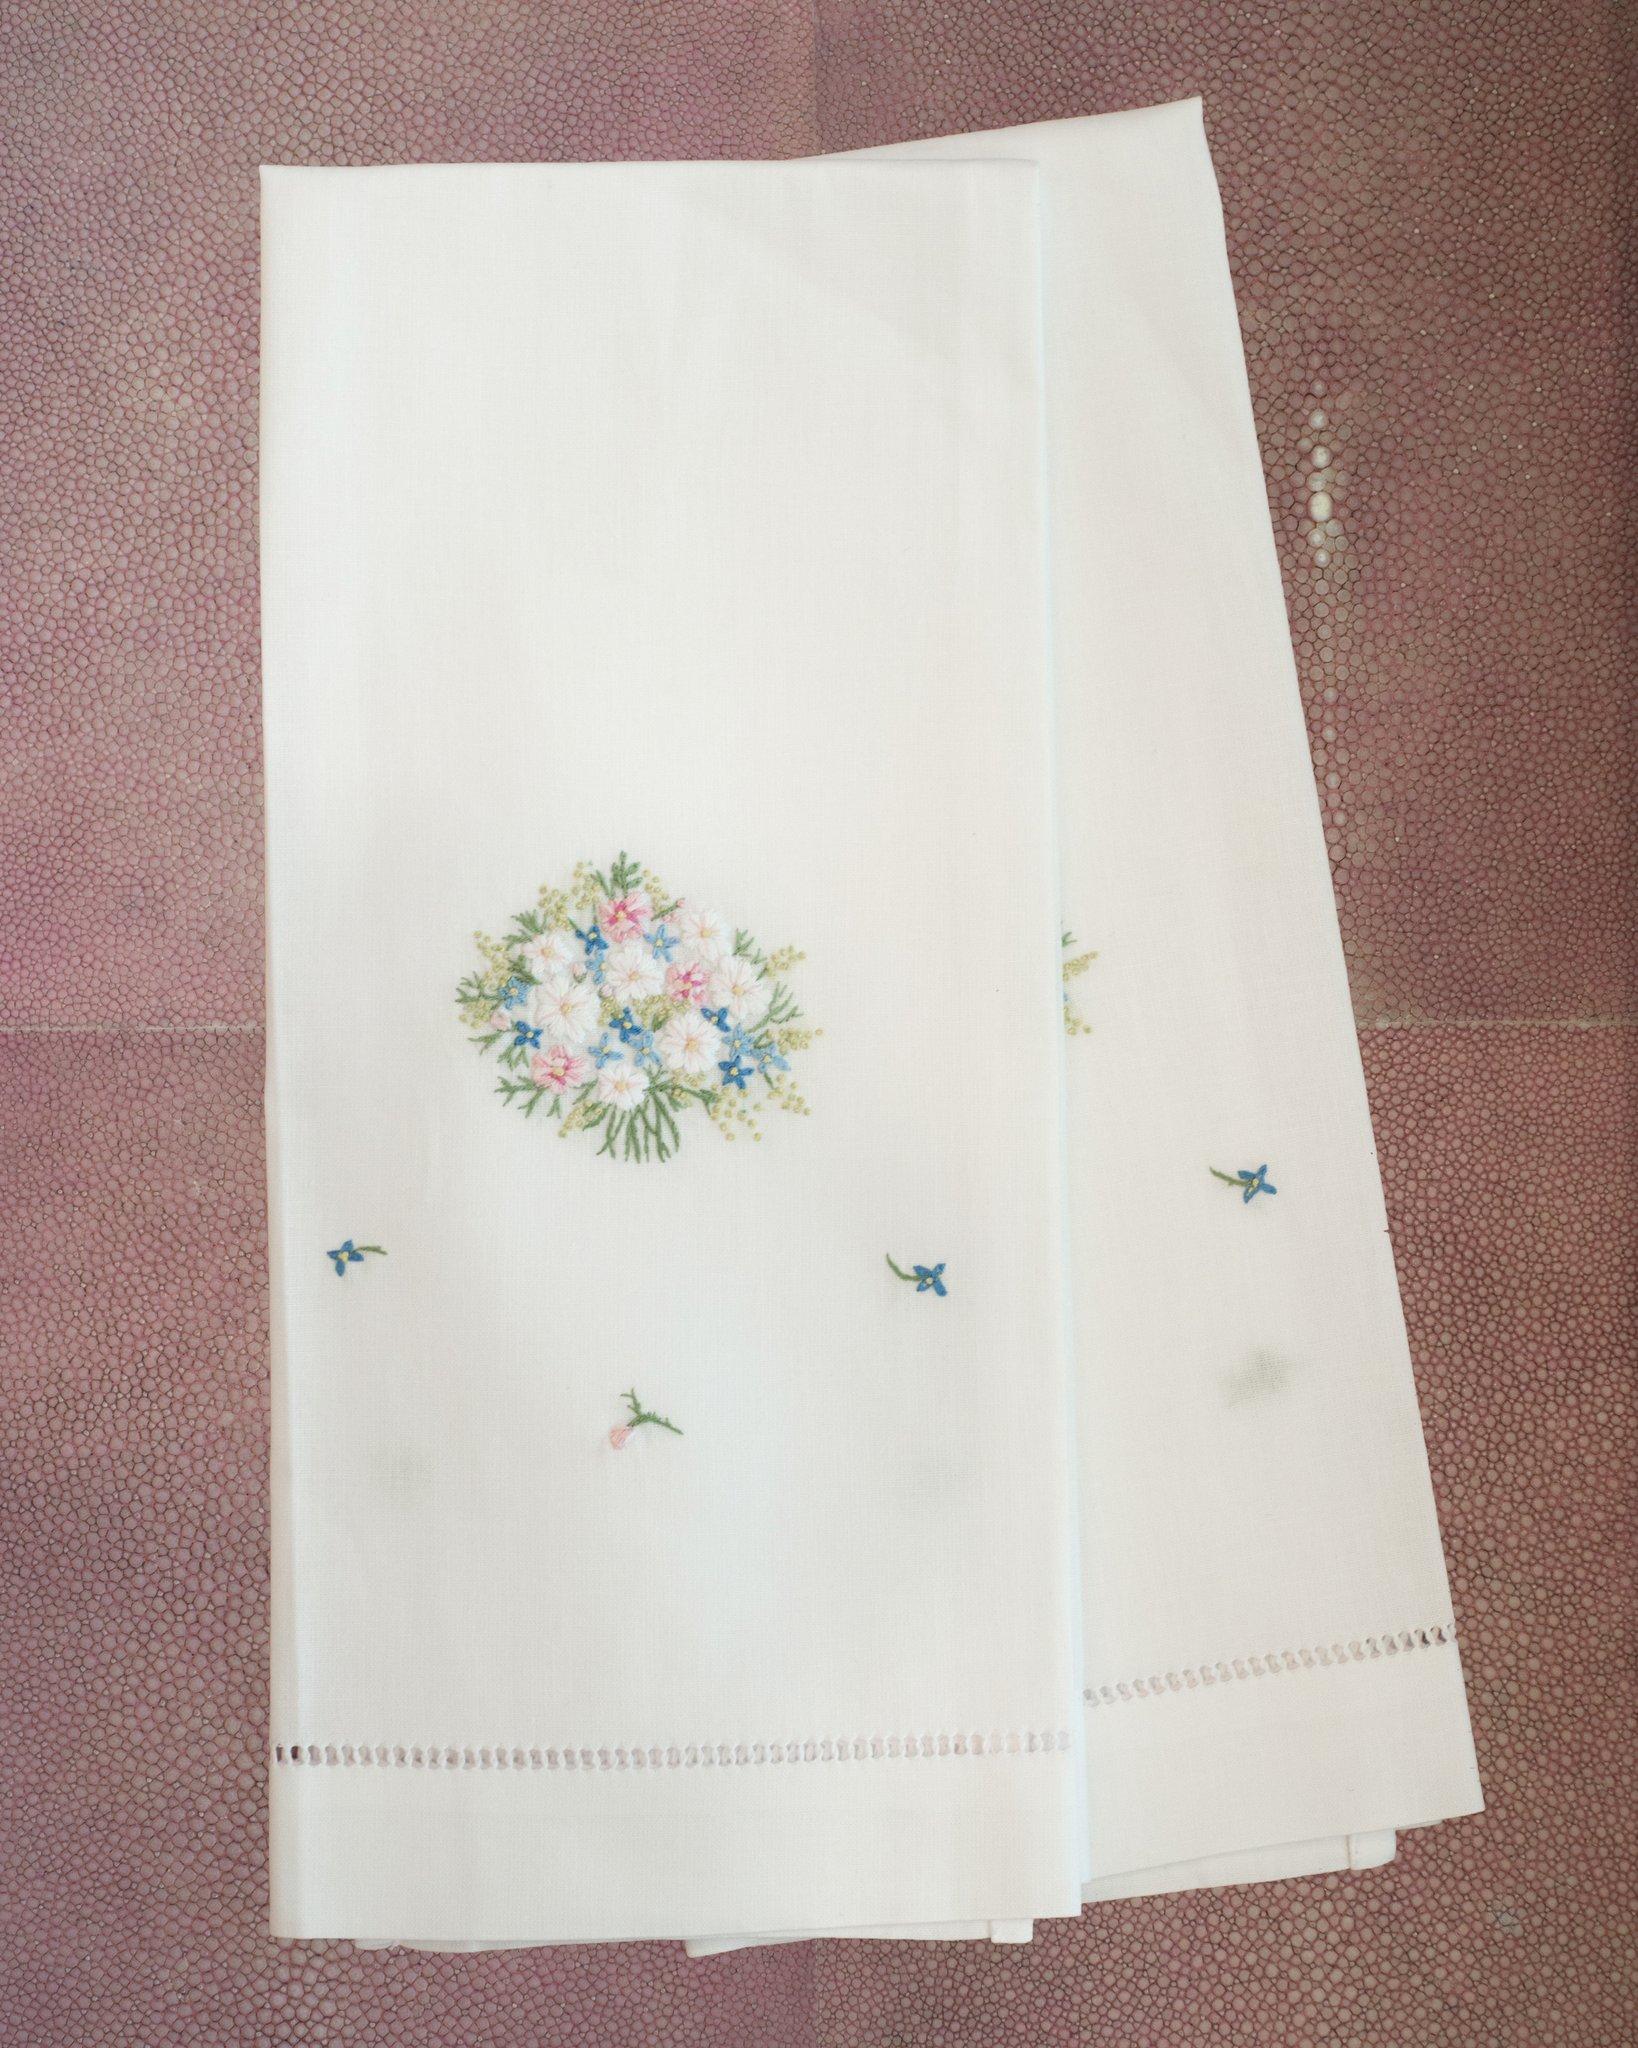 A stunning set of 2 hand embroidered linen guest towels, made by hand in Portugal and embroidered with bunches of flowers. A unique blend of timeless European inspiration and Classic design expressed in the finest materials and finishes. Operating